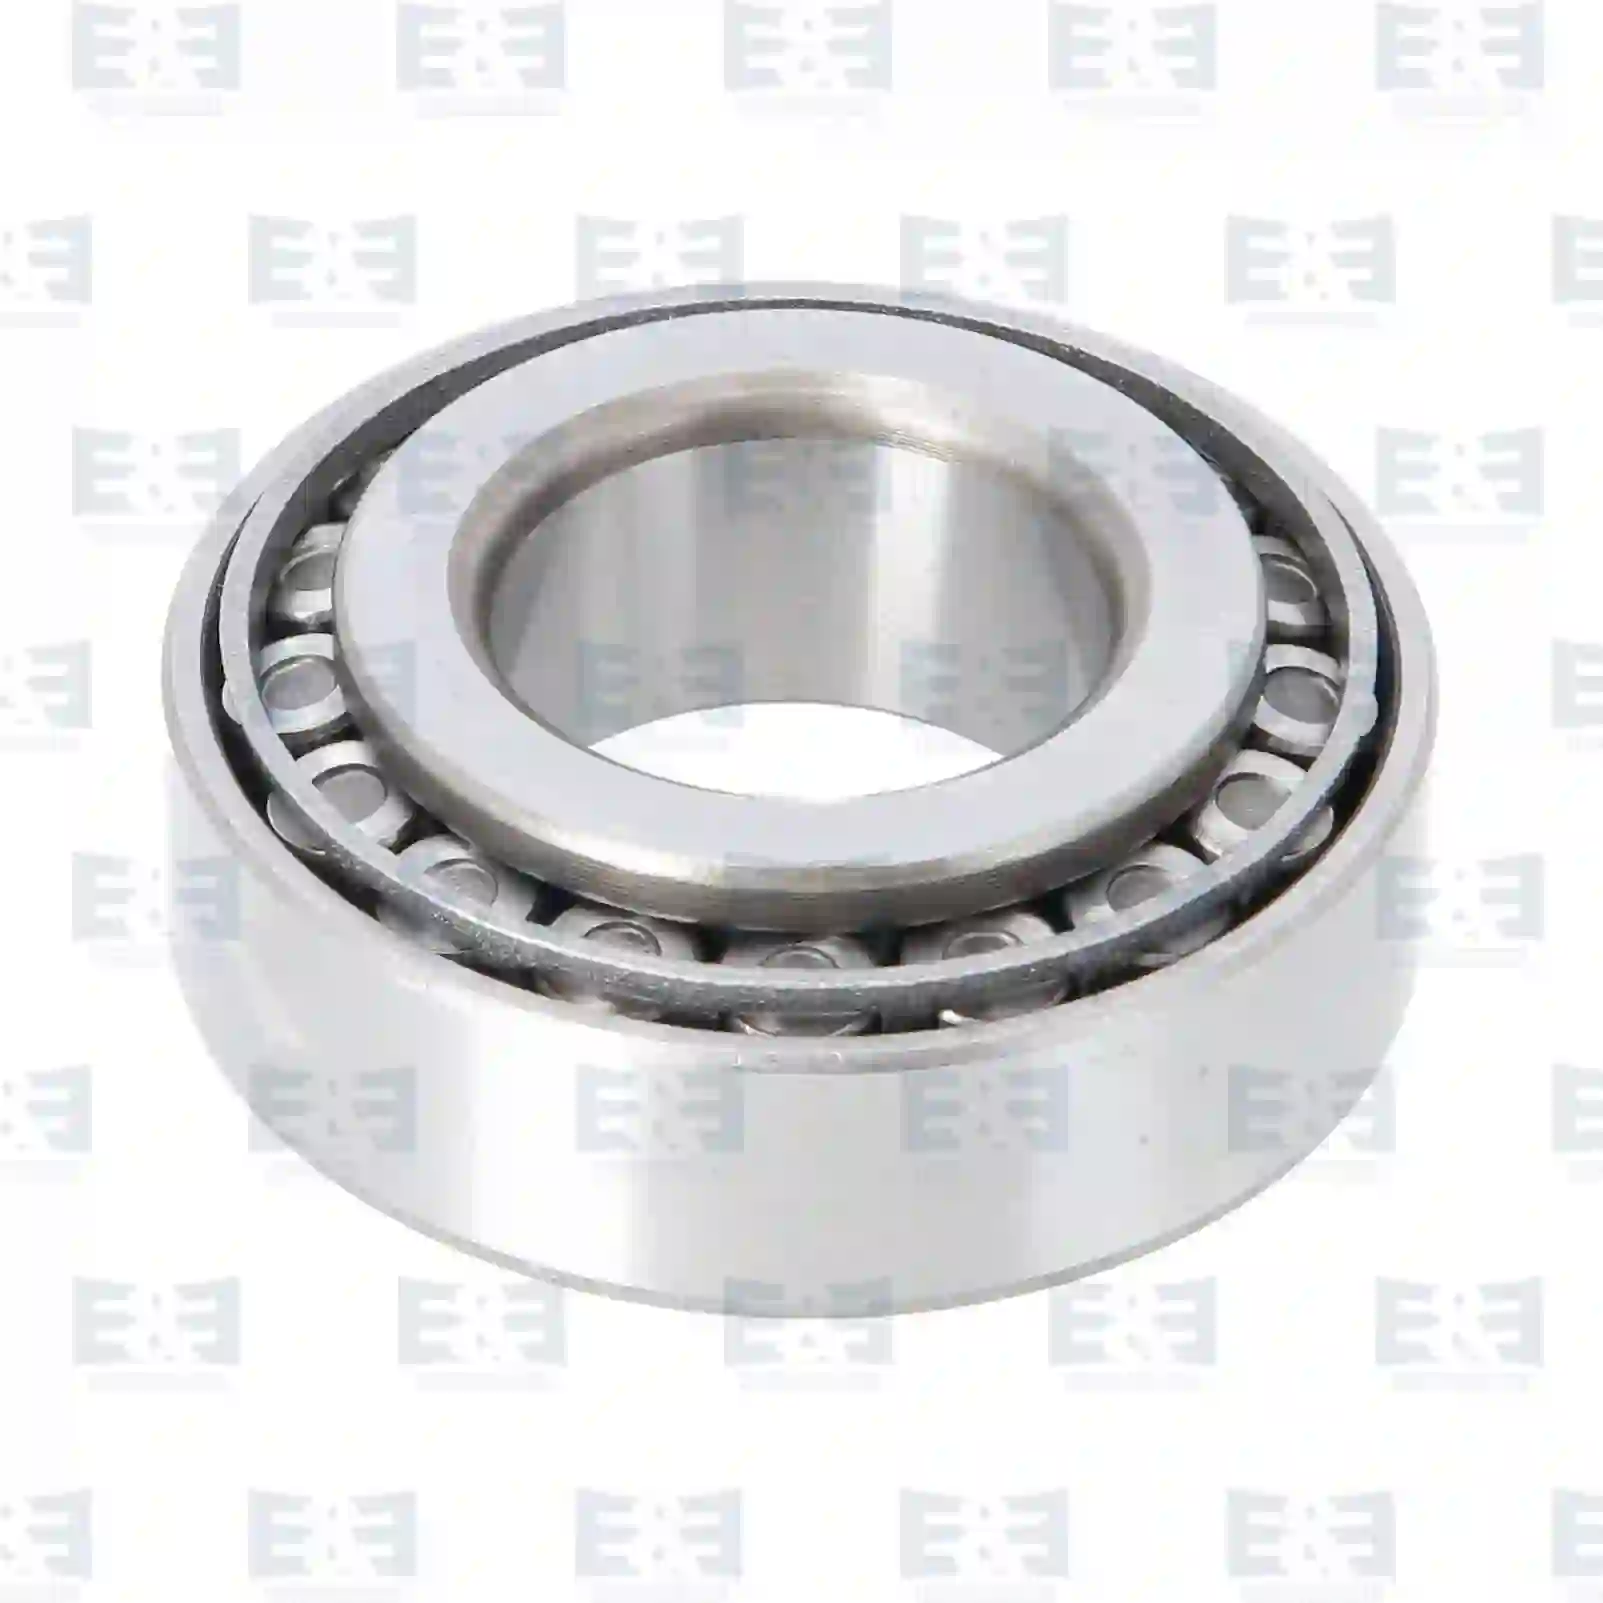 Tapered roller bearing, 2E2286406, 290062240, 373022, 373518, 373519, 620049, 620053, 0491899, 1344221, 1400078, 140078, 164670, 491899, NAK9186, 900436601700, TK4210416, 00814138, 05996248, 26800120, 94020002, 94205016, 94249643, 5-09812025-0, 5-09812026-0, 5-09812027-0, 8-94249643-2, 9-00032206-0, 01100000, 01110000, 01905272, 05996248, 08835016, 08857787, 00755-27210, 00632499006, 06324990066, 06324990080, 06342990066, A0023432206, A0773220600, 075527210, 805127142, 0009813105, 000720032206, 0019811505, 0019816105, 0019816505, 0029801302, 0079817605, MB025004, MH043145, 32273-M5100, 38120-18000, 38120-1KD0A, 466667, 373022, 373518, 373519, 620049, 620053, 0007732206, 0023336266, 0023432206, 0959232206, 5516010506, 5516016470, 5516016472, 7703090085, 123631, 183583, 19553, 6601861, 7019553, ZG03022-0008 ||  2E2286406 E&E Truck Spare Parts | Truck Spare Parts, Auotomotive Spare Parts Tapered roller bearing, 2E2286406, 290062240, 373022, 373518, 373519, 620049, 620053, 0491899, 1344221, 1400078, 140078, 164670, 491899, NAK9186, 900436601700, TK4210416, 00814138, 05996248, 26800120, 94020002, 94205016, 94249643, 5-09812025-0, 5-09812026-0, 5-09812027-0, 8-94249643-2, 9-00032206-0, 01100000, 01110000, 01905272, 05996248, 08835016, 08857787, 00755-27210, 00632499006, 06324990066, 06324990080, 06342990066, A0023432206, A0773220600, 075527210, 805127142, 0009813105, 000720032206, 0019811505, 0019816105, 0019816505, 0029801302, 0079817605, MB025004, MH043145, 32273-M5100, 38120-18000, 38120-1KD0A, 466667, 373022, 373518, 373519, 620049, 620053, 0007732206, 0023336266, 0023432206, 0959232206, 5516010506, 5516016470, 5516016472, 7703090085, 123631, 183583, 19553, 6601861, 7019553, ZG03022-0008 ||  2E2286406 E&E Truck Spare Parts | Truck Spare Parts, Auotomotive Spare Parts